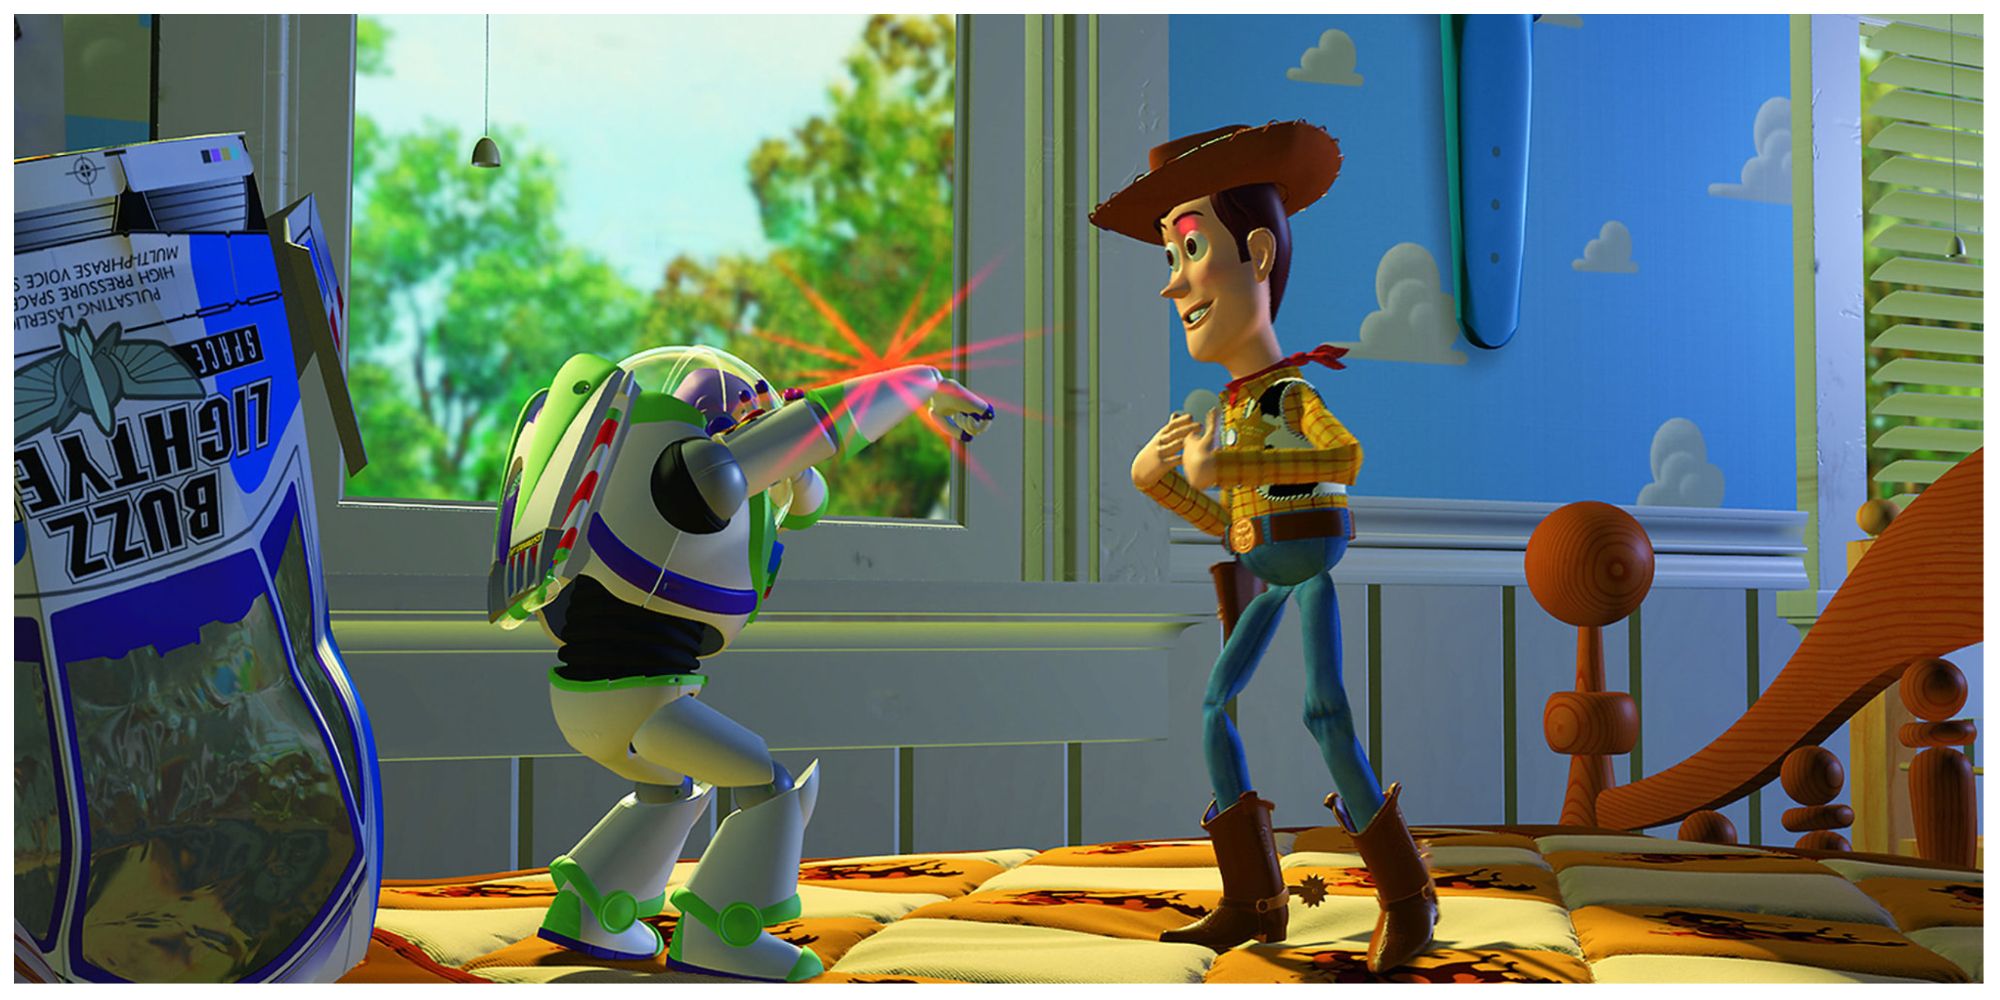 Buzz Lightyear firing a laser at Woody on Andy's bed in Toy Story